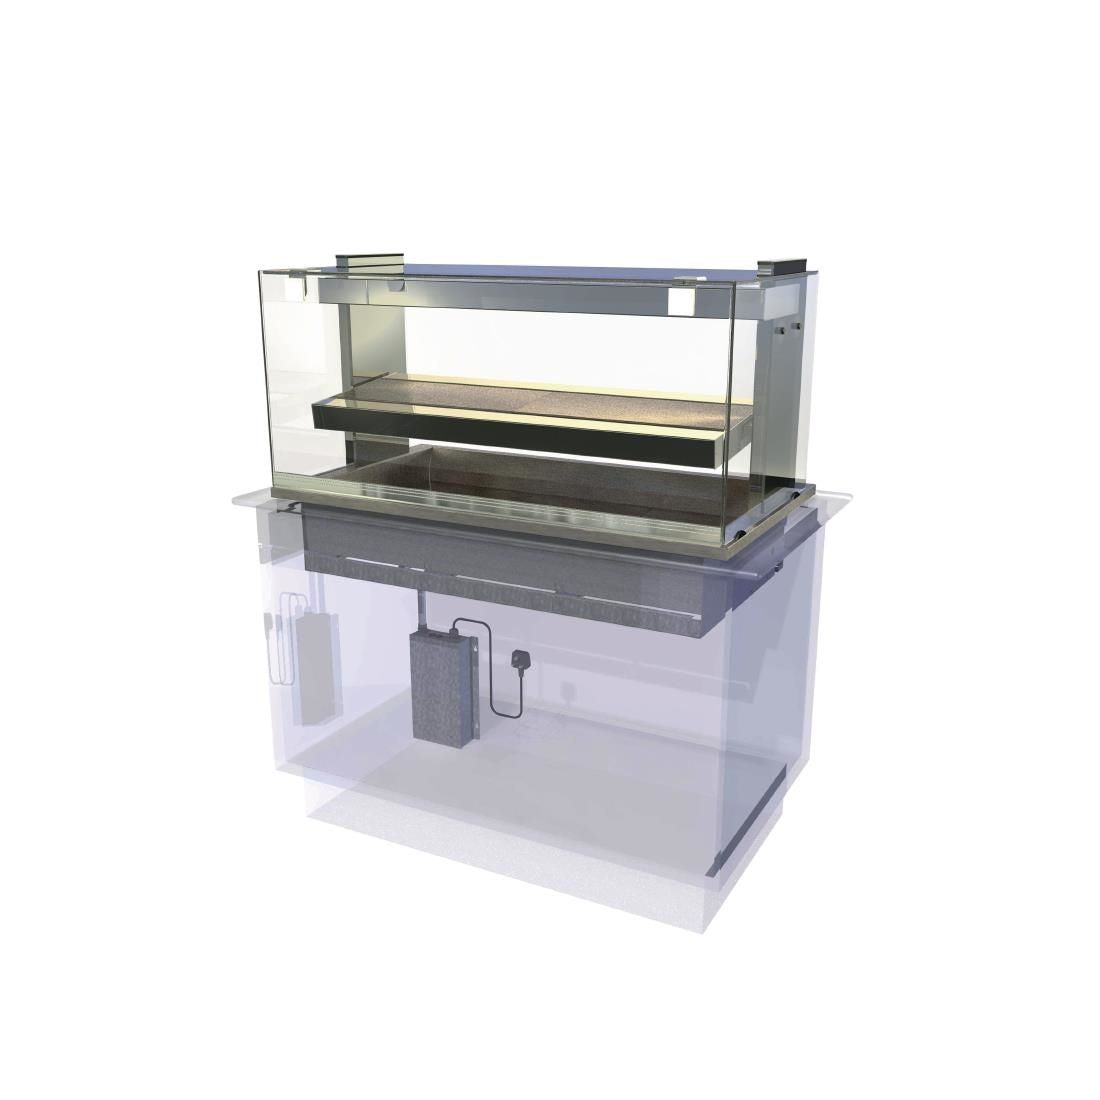 CW637 Kubus Drop In Heated Serve Over Counter KHDL3 JD Catering Equipment Solutions Ltd